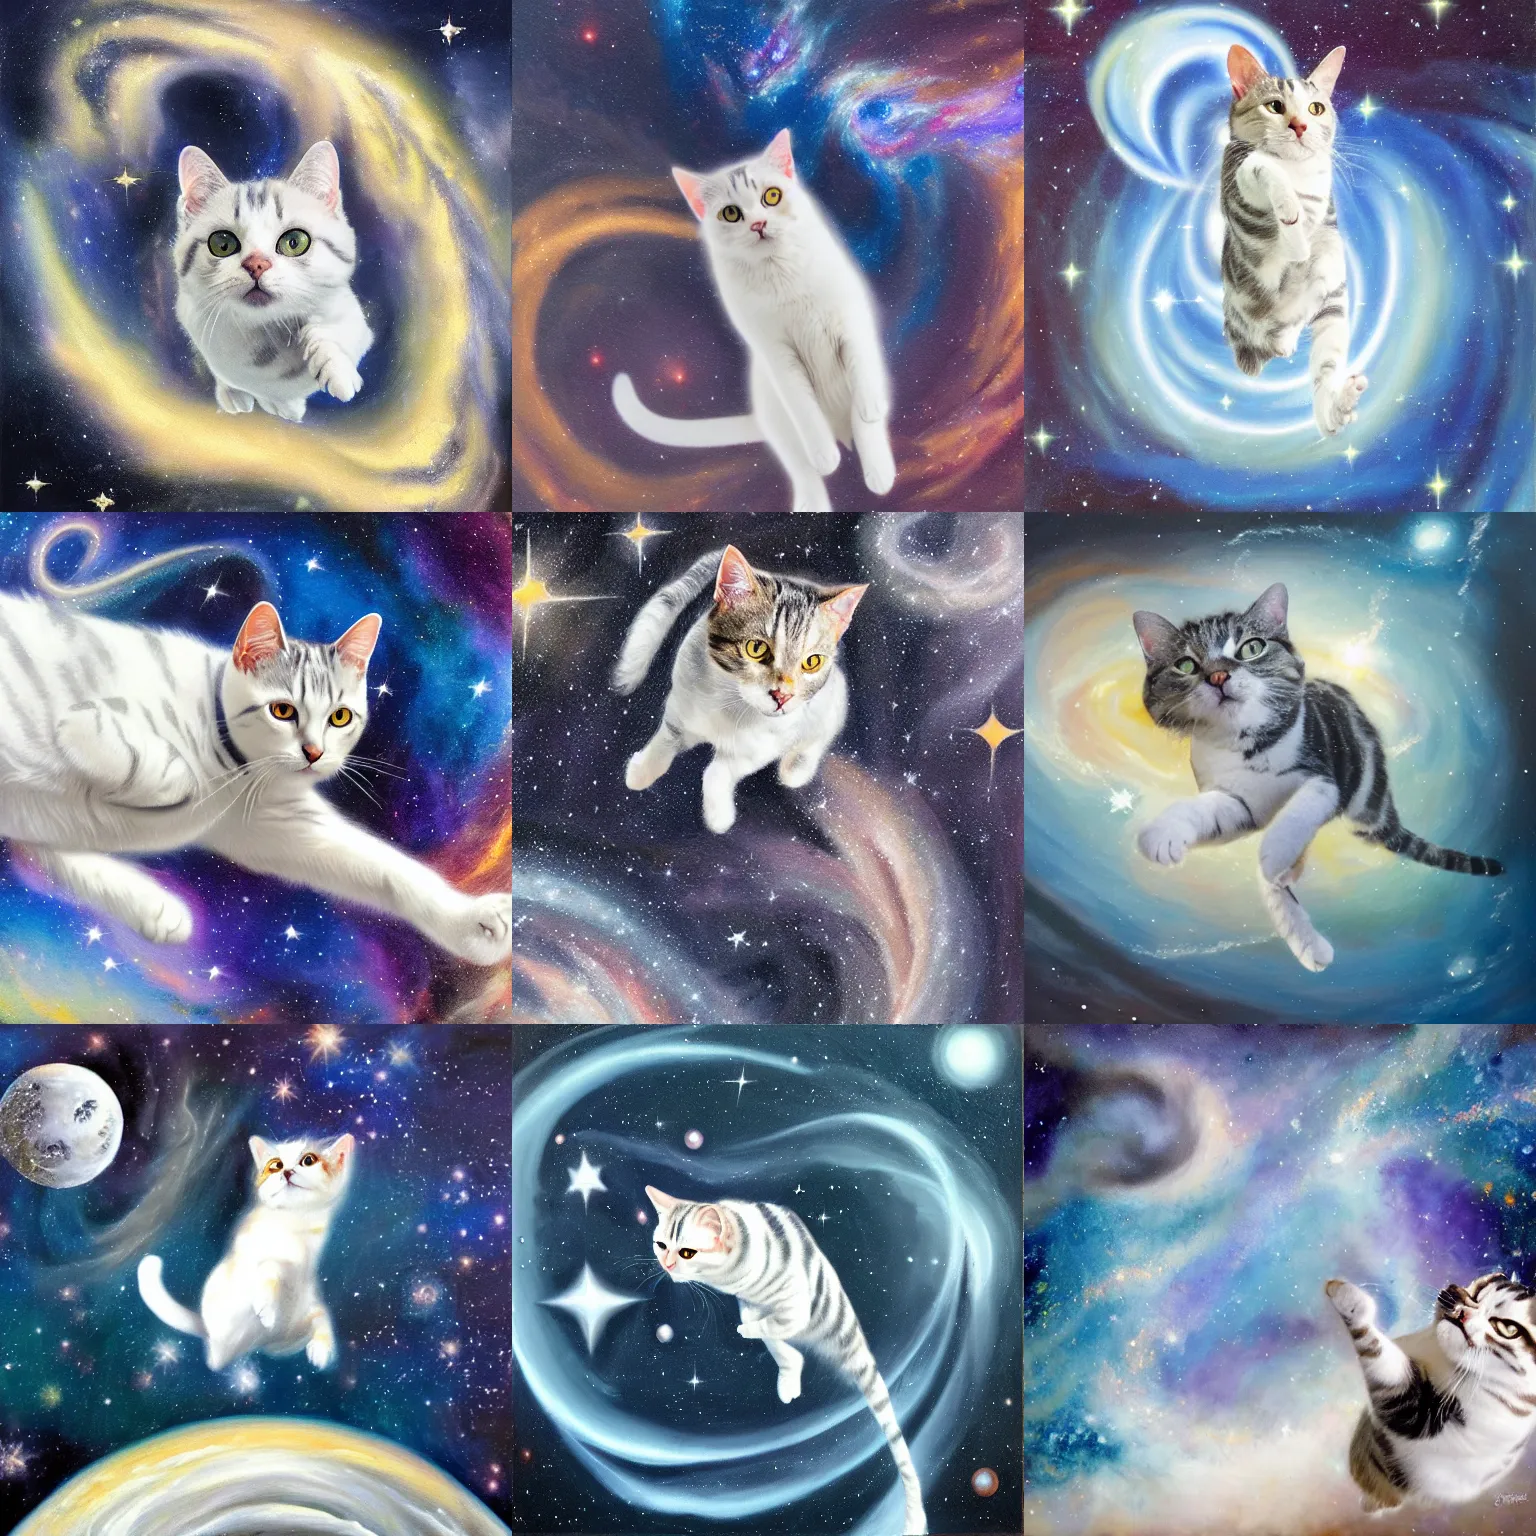 Prompt: oil painting of a white and grey tabby cat flying in front of a swirling galaxy, shimmering stars, milky way, dreamy